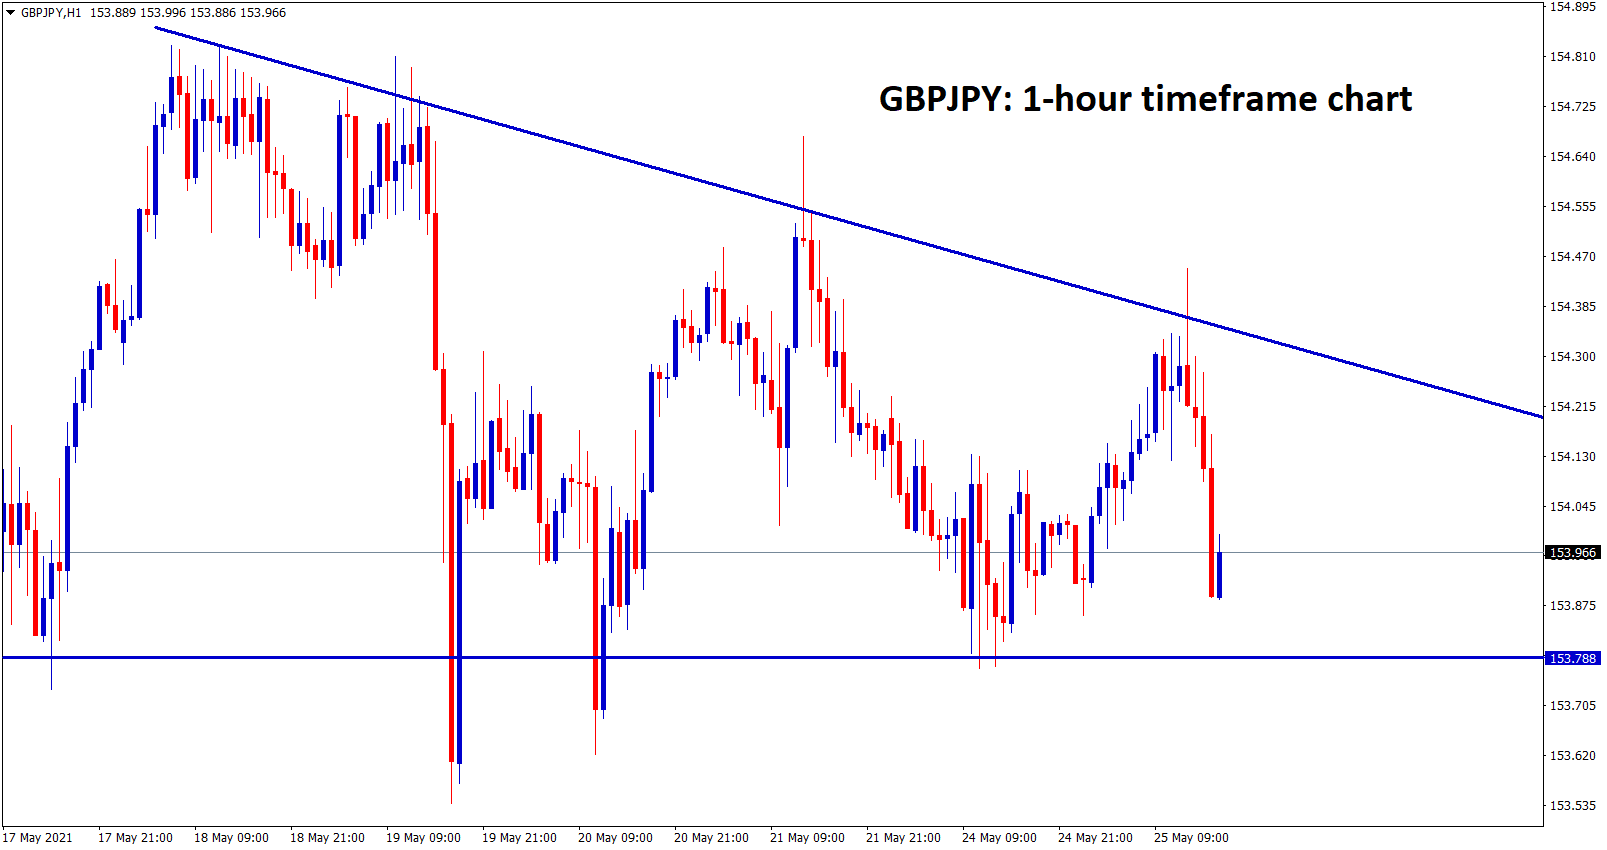 GBPJPY is moving in a descending triangle pattern